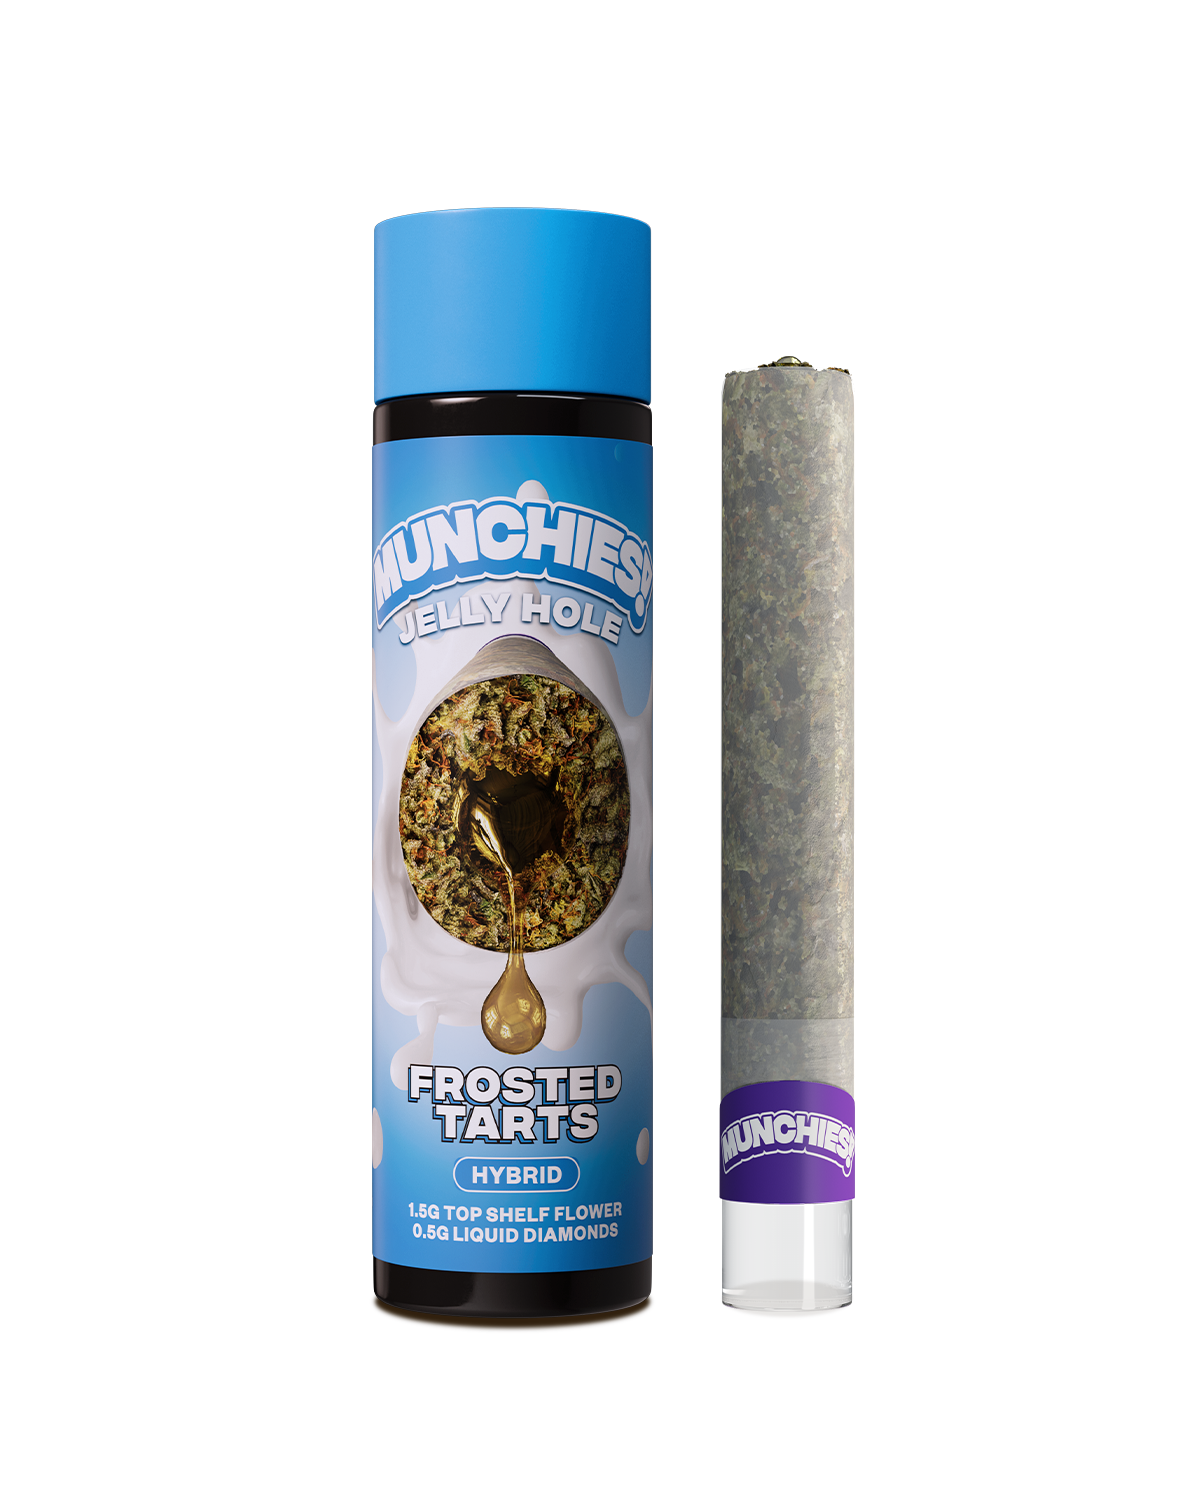 Jelly Hole THC-A Pre Roll Munchies Strands